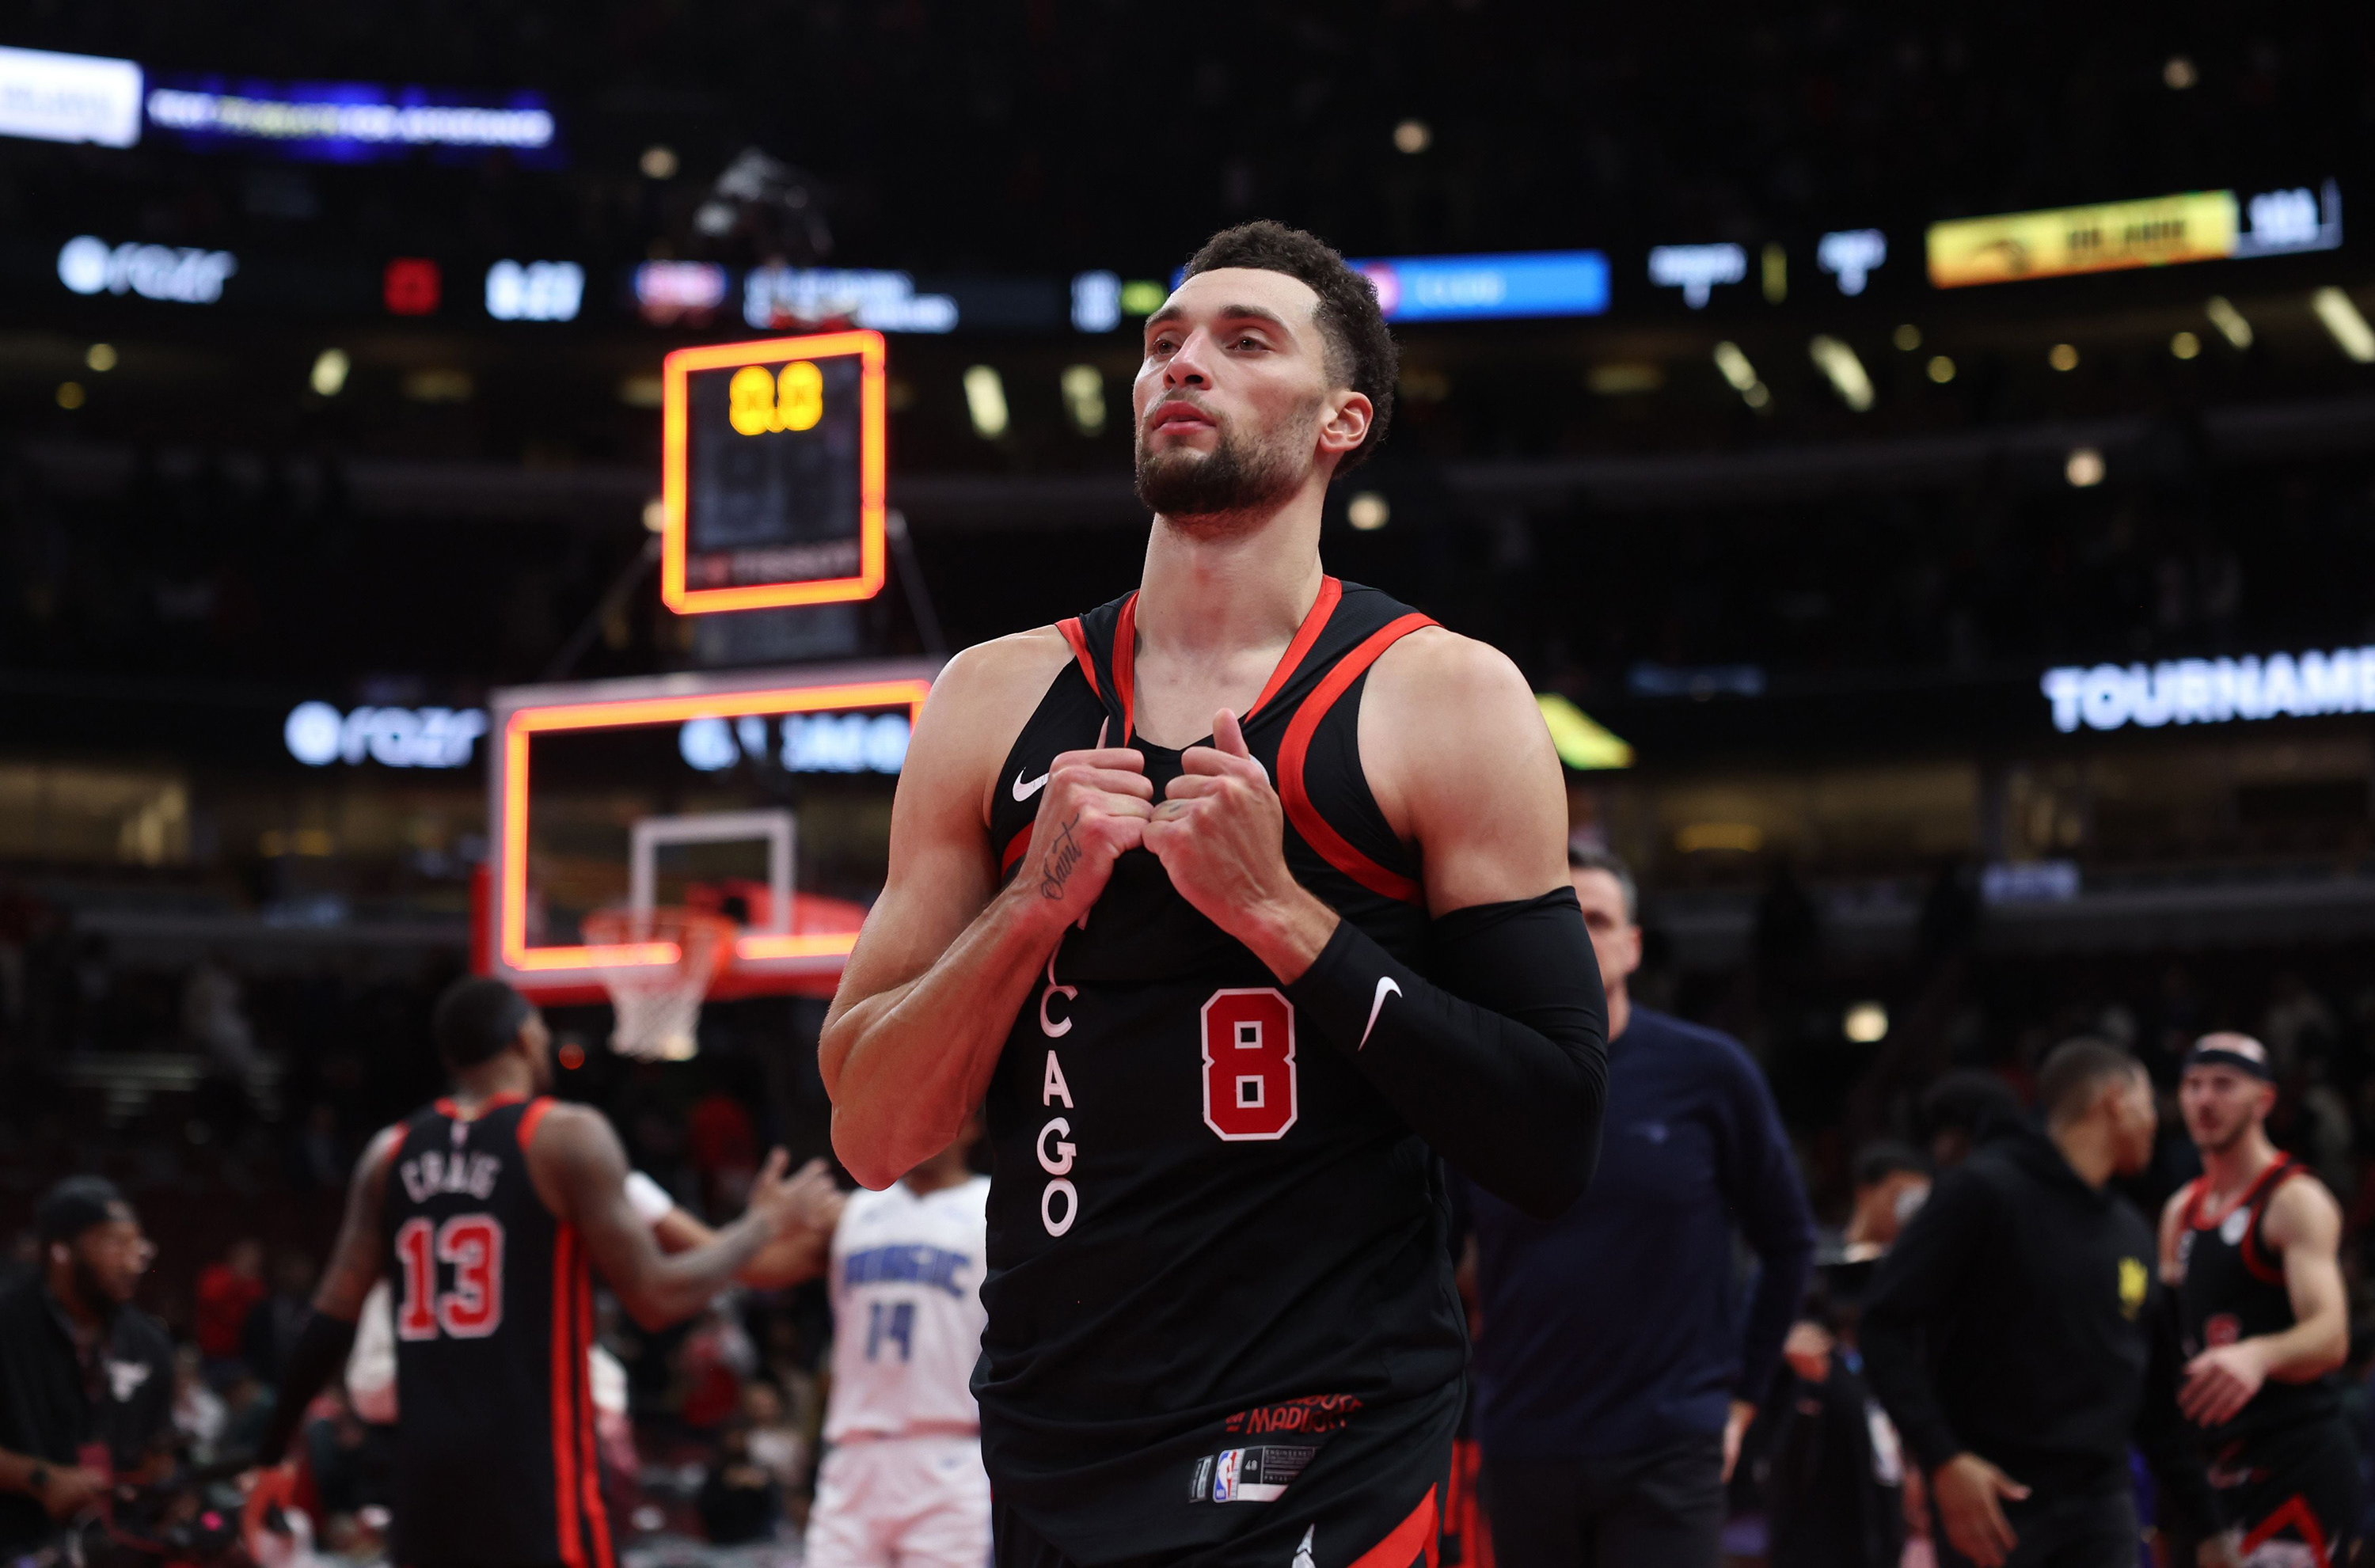 LaVine And Bulls Could Work Together To Find Him A Trade Out Of Chicago